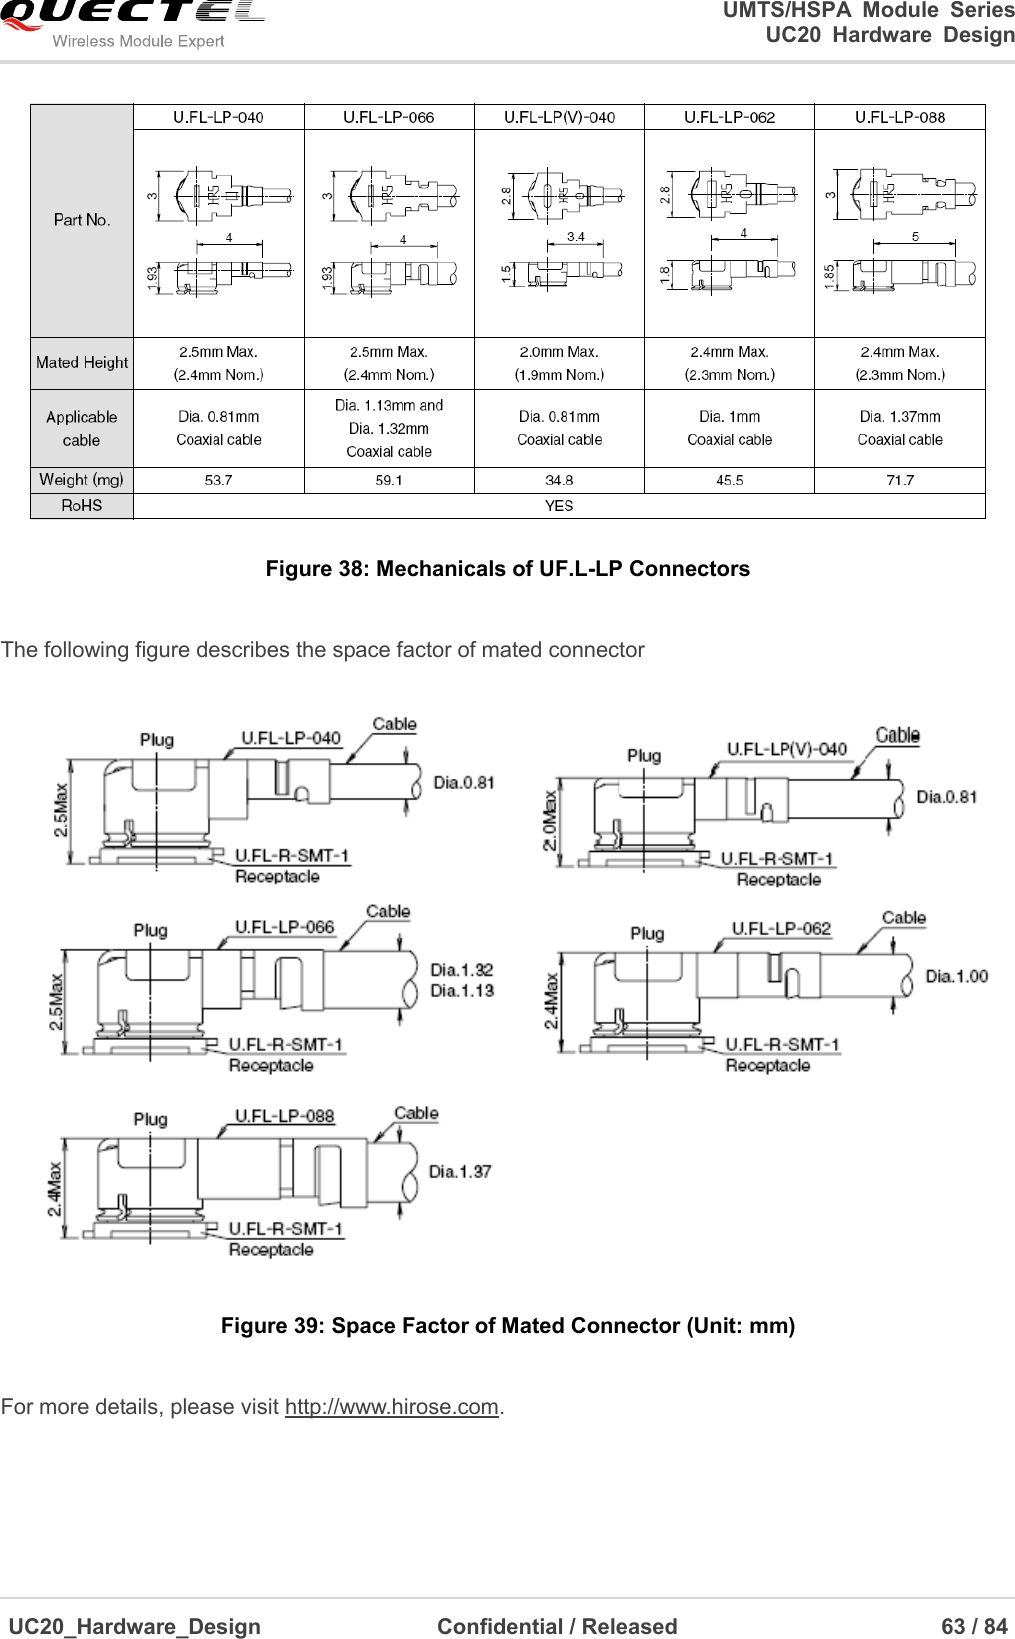                                                                                                                                               UMTS/HSPA  Module  Series                                                                 UC20  Hardware  Design  UC20_Hardware_Design                  Confidential / Released                            63 / 84      Figure 38: Mechanicals of UF.L-LP Connectors  The following figure describes the space factor of mated connector  Figure 39: Space Factor of Mated Connector (Unit: mm)  For more details, please visit http://www.hirose.com. 